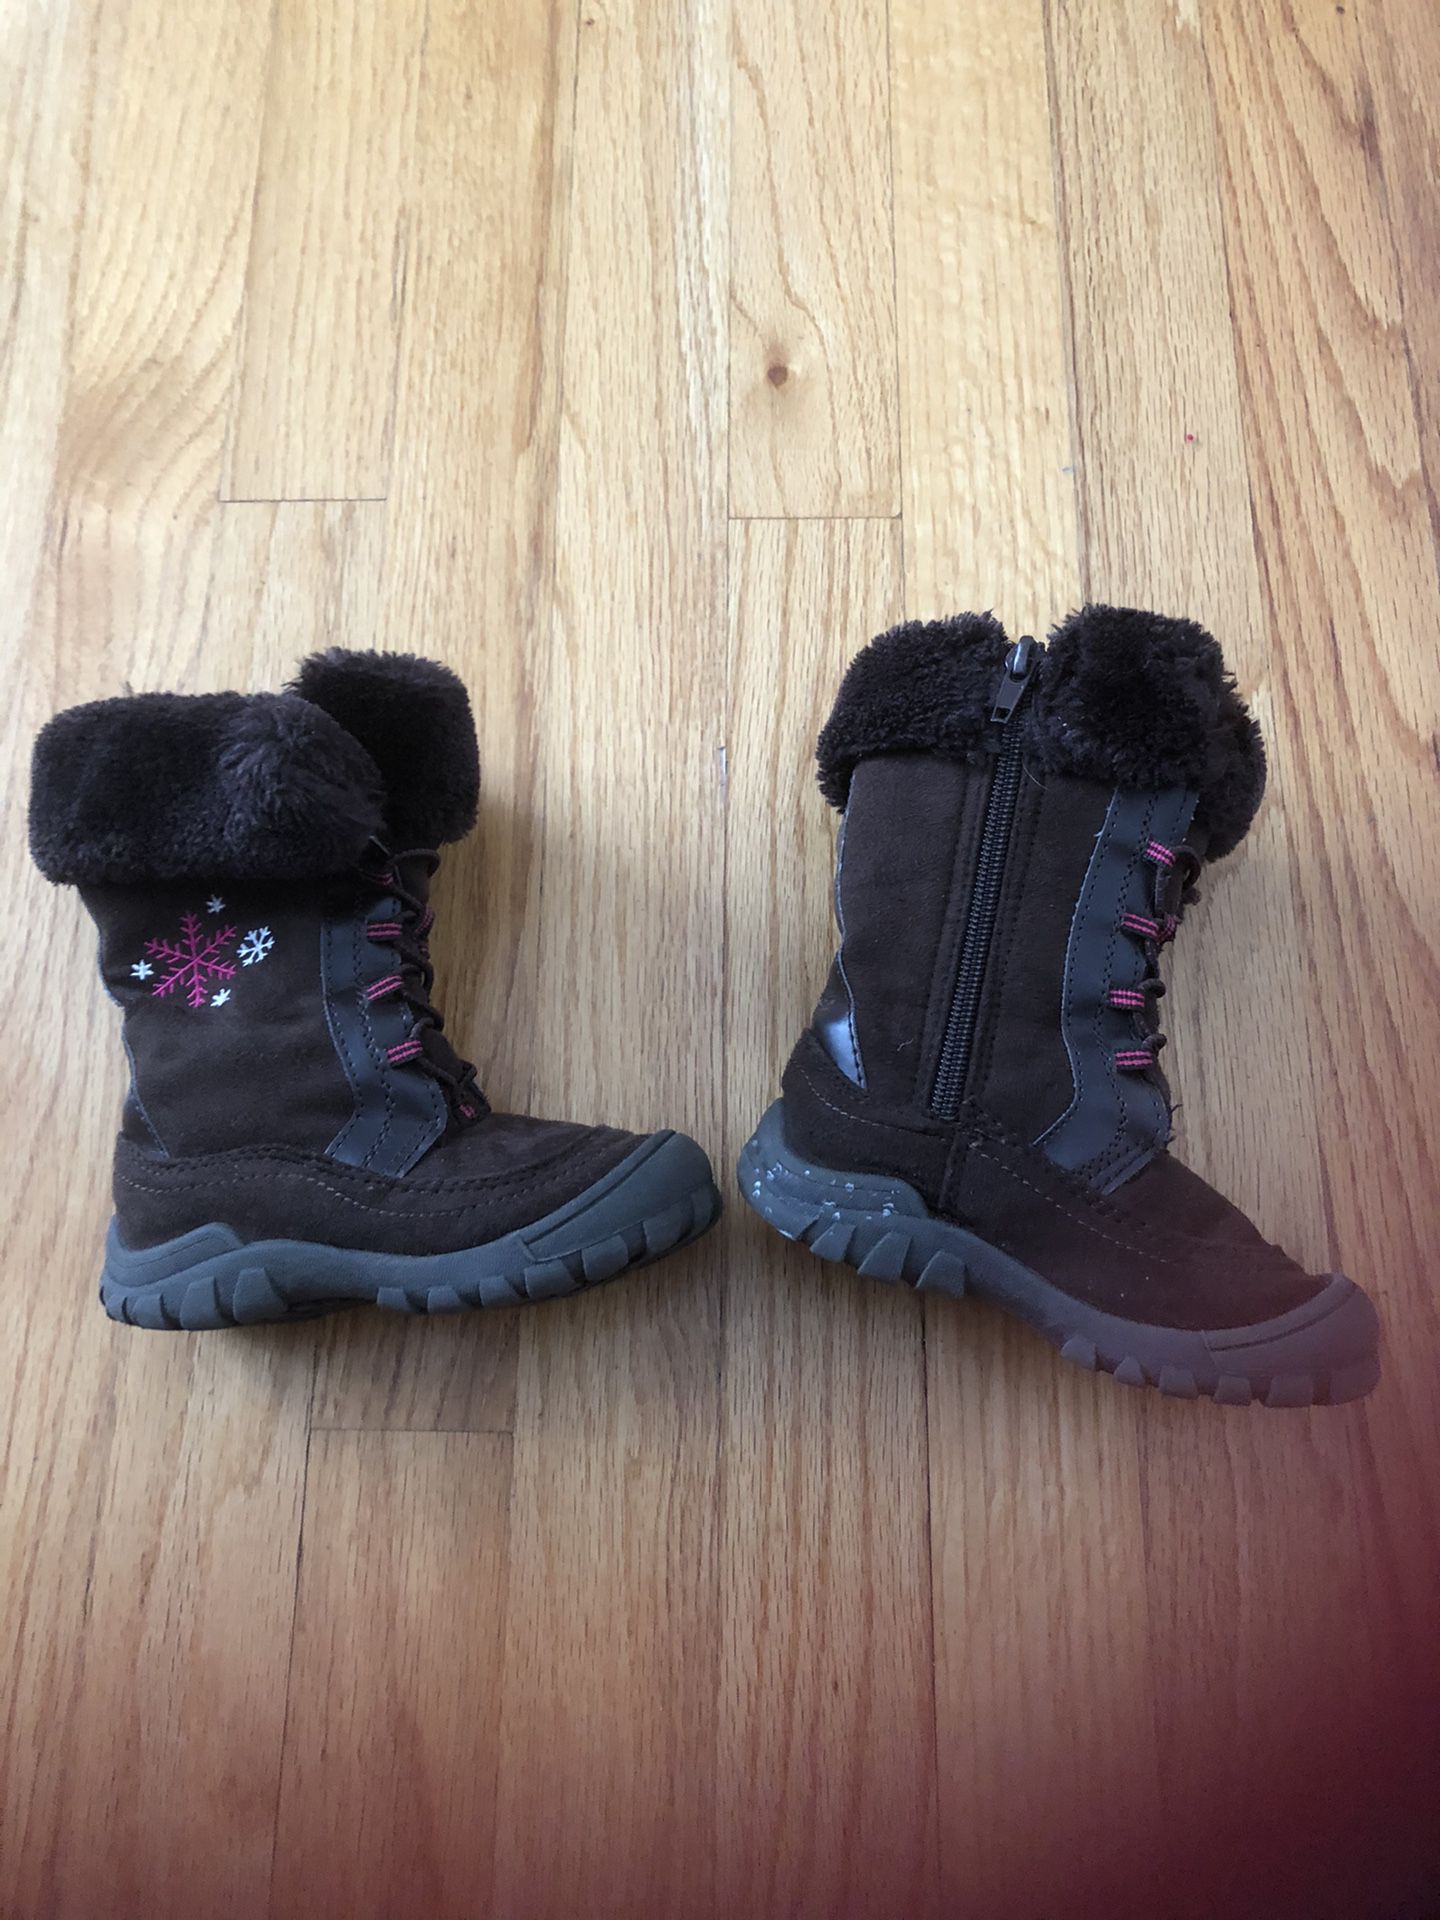 Toddler girl boots size 7M